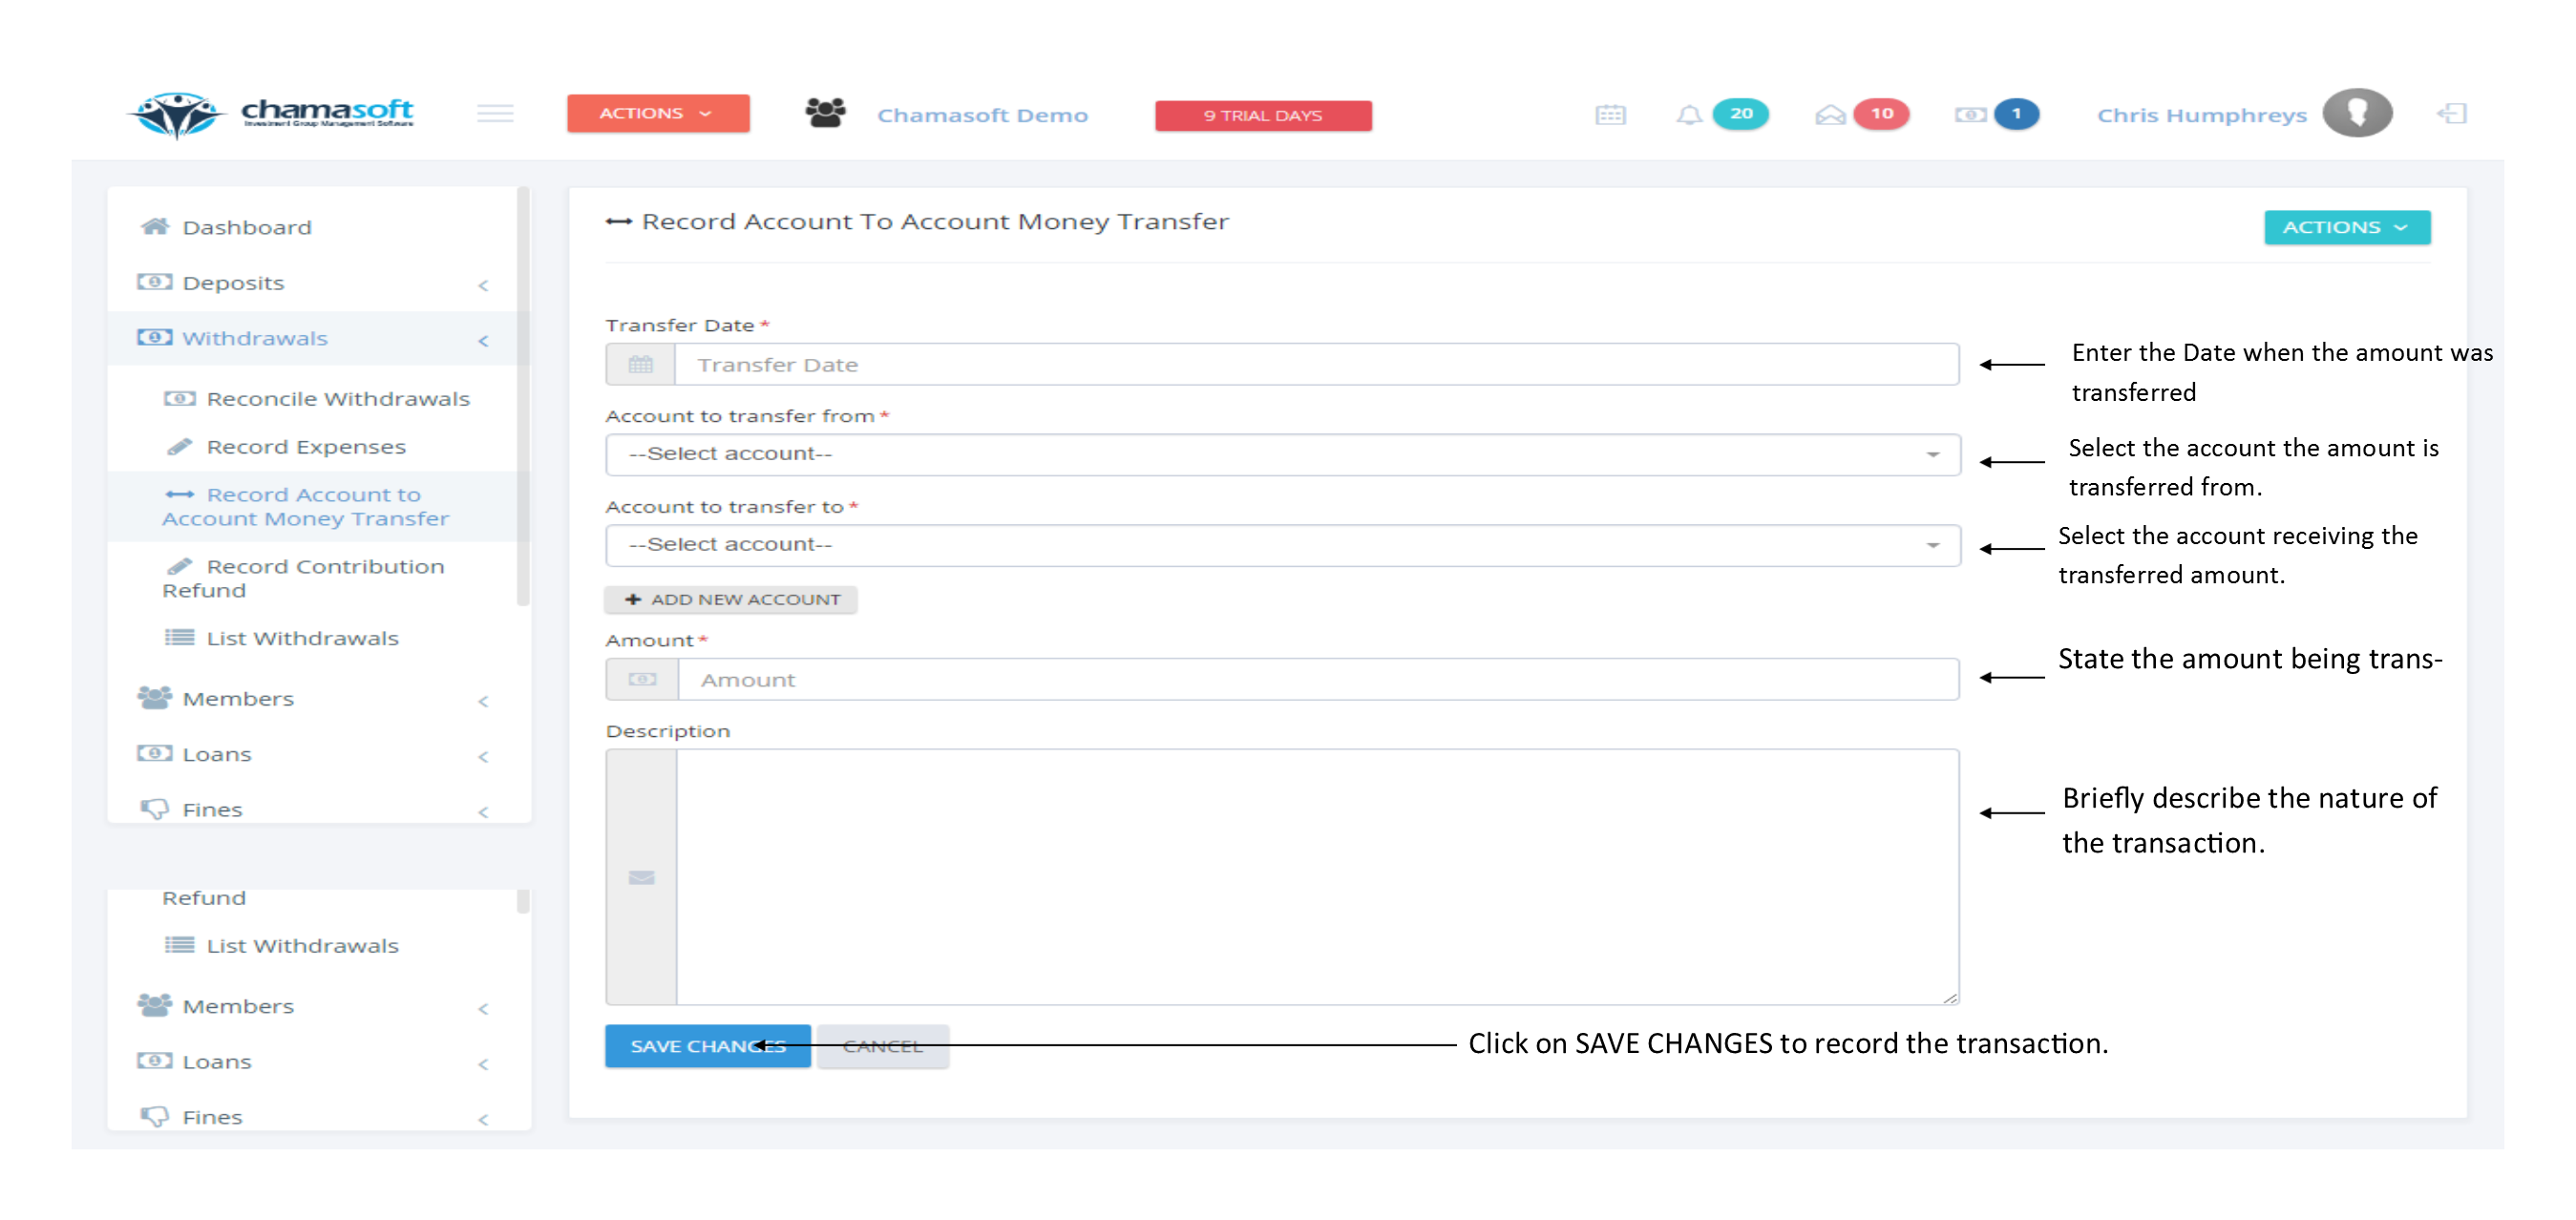 Recording Account To Account Money Transfer